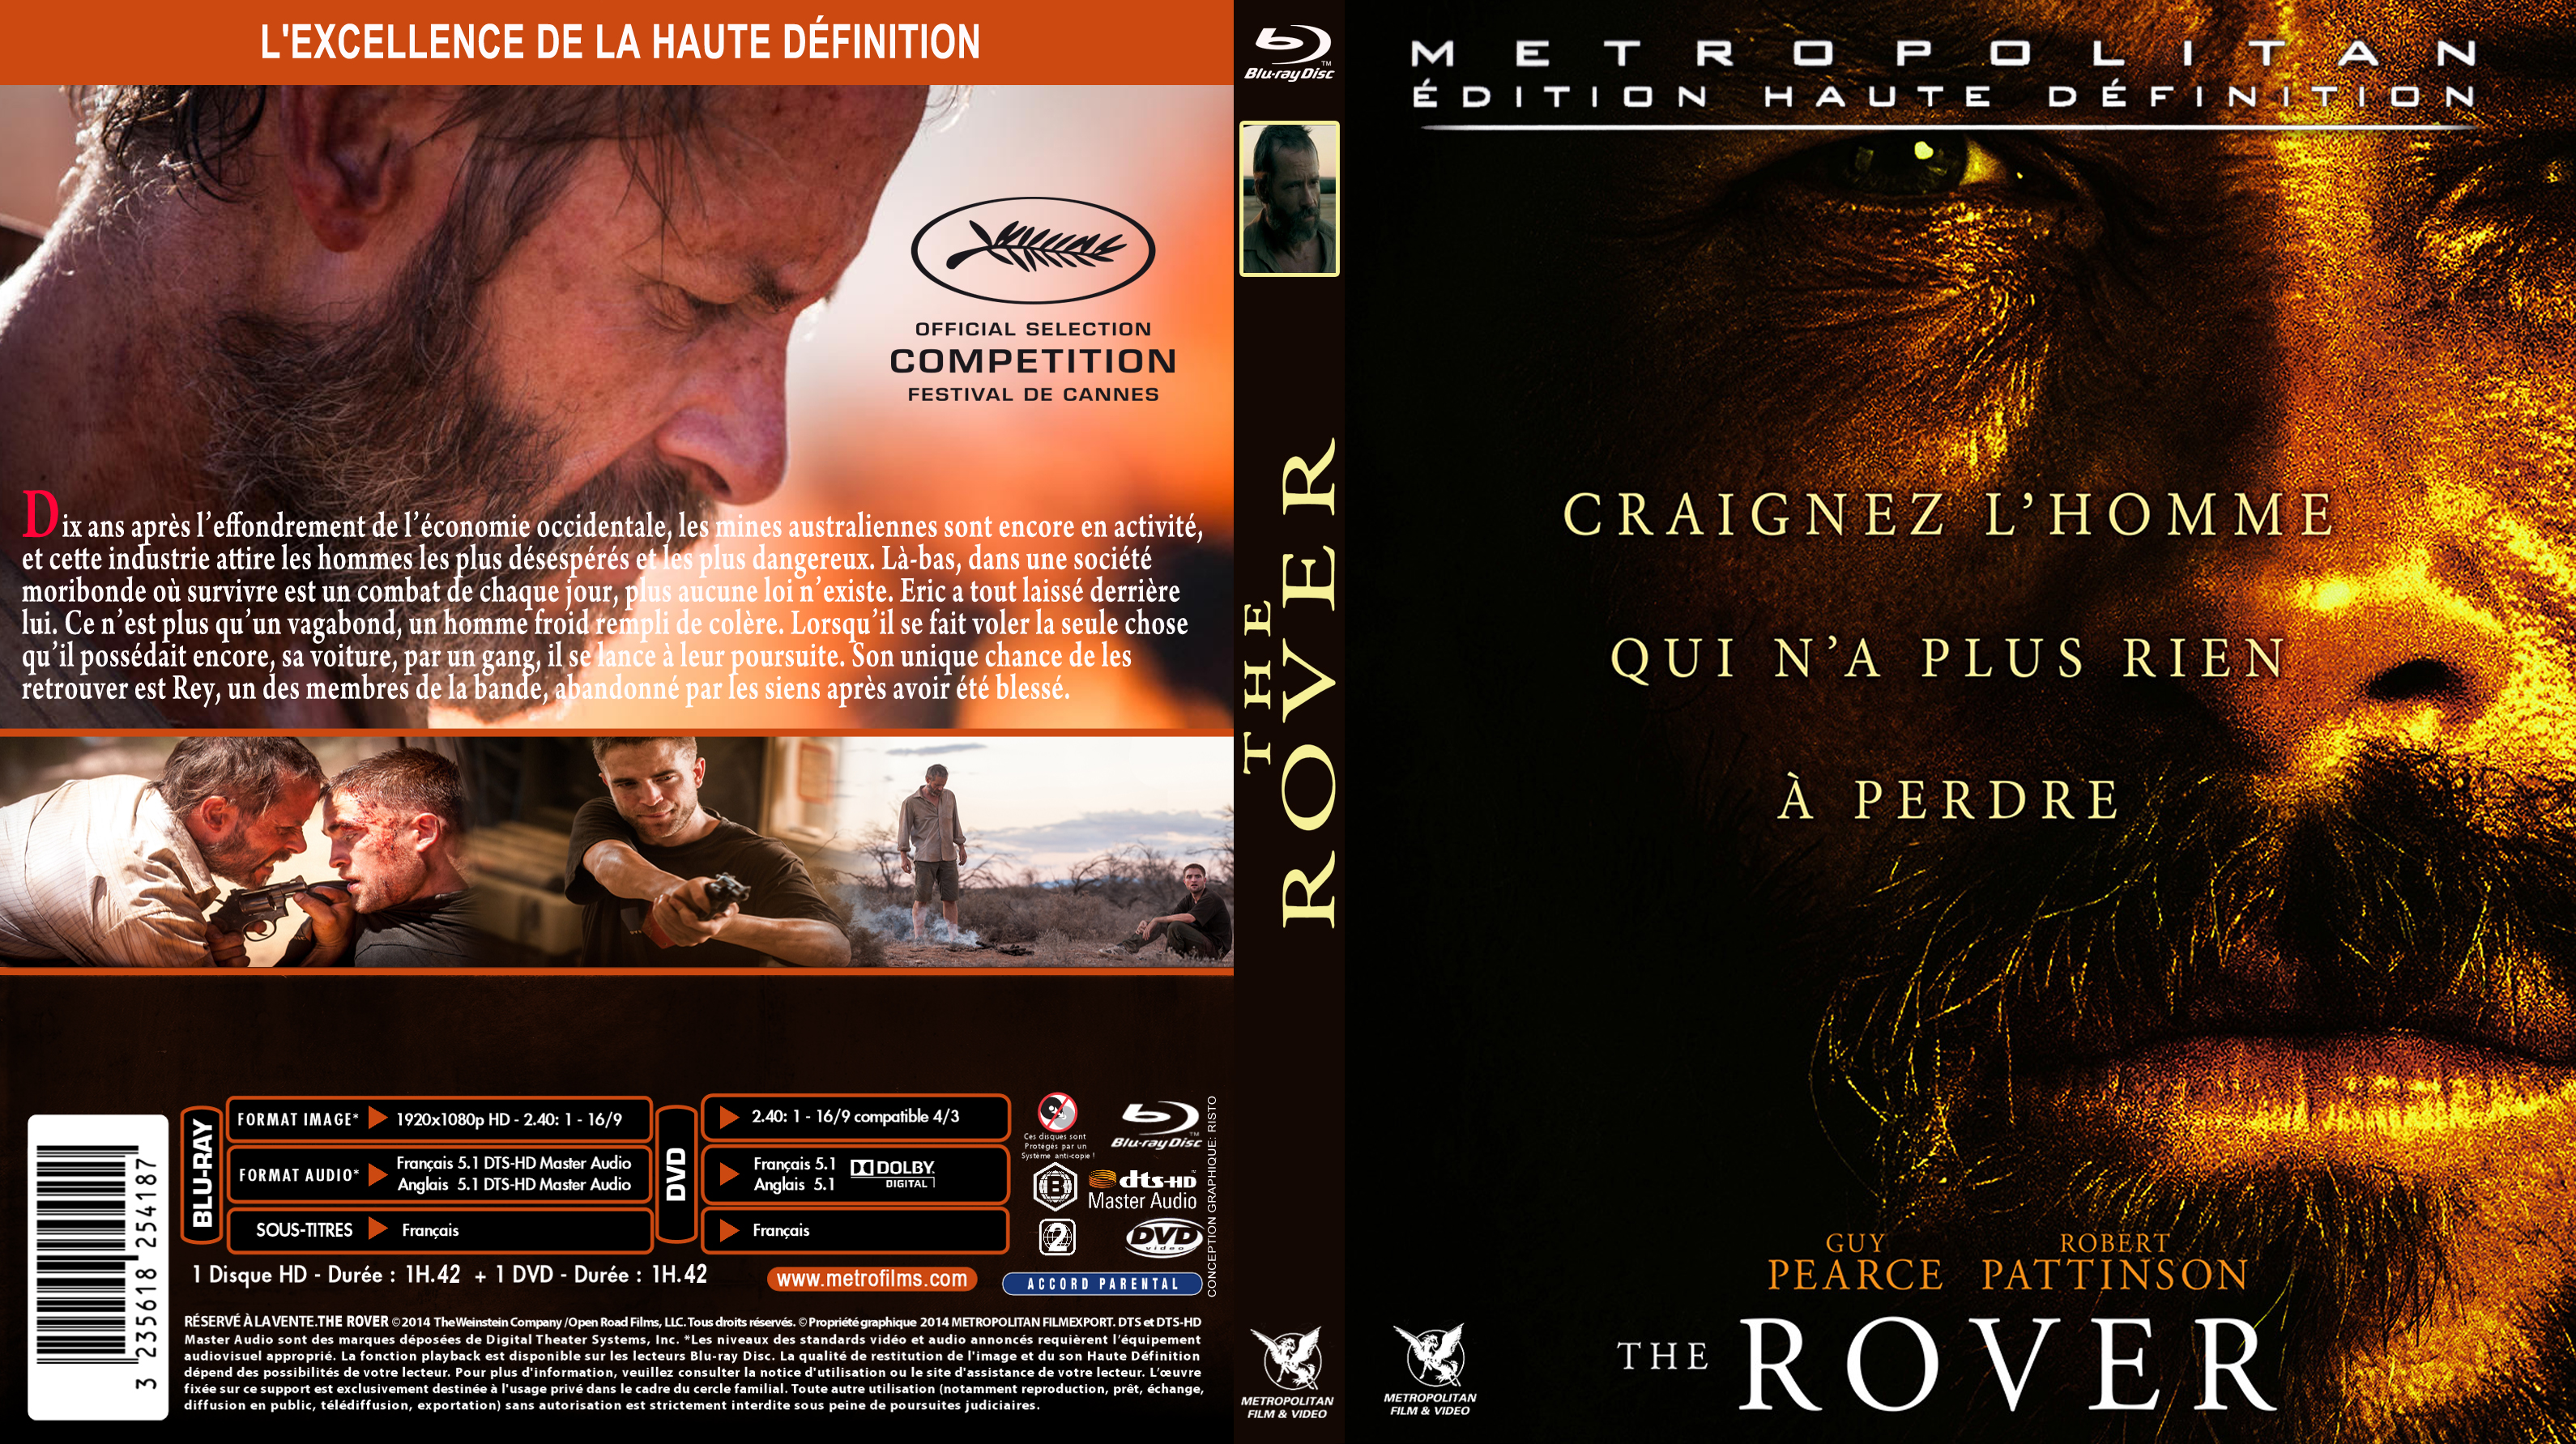 Jaquette DVD The rover custom (BLU-RAY)